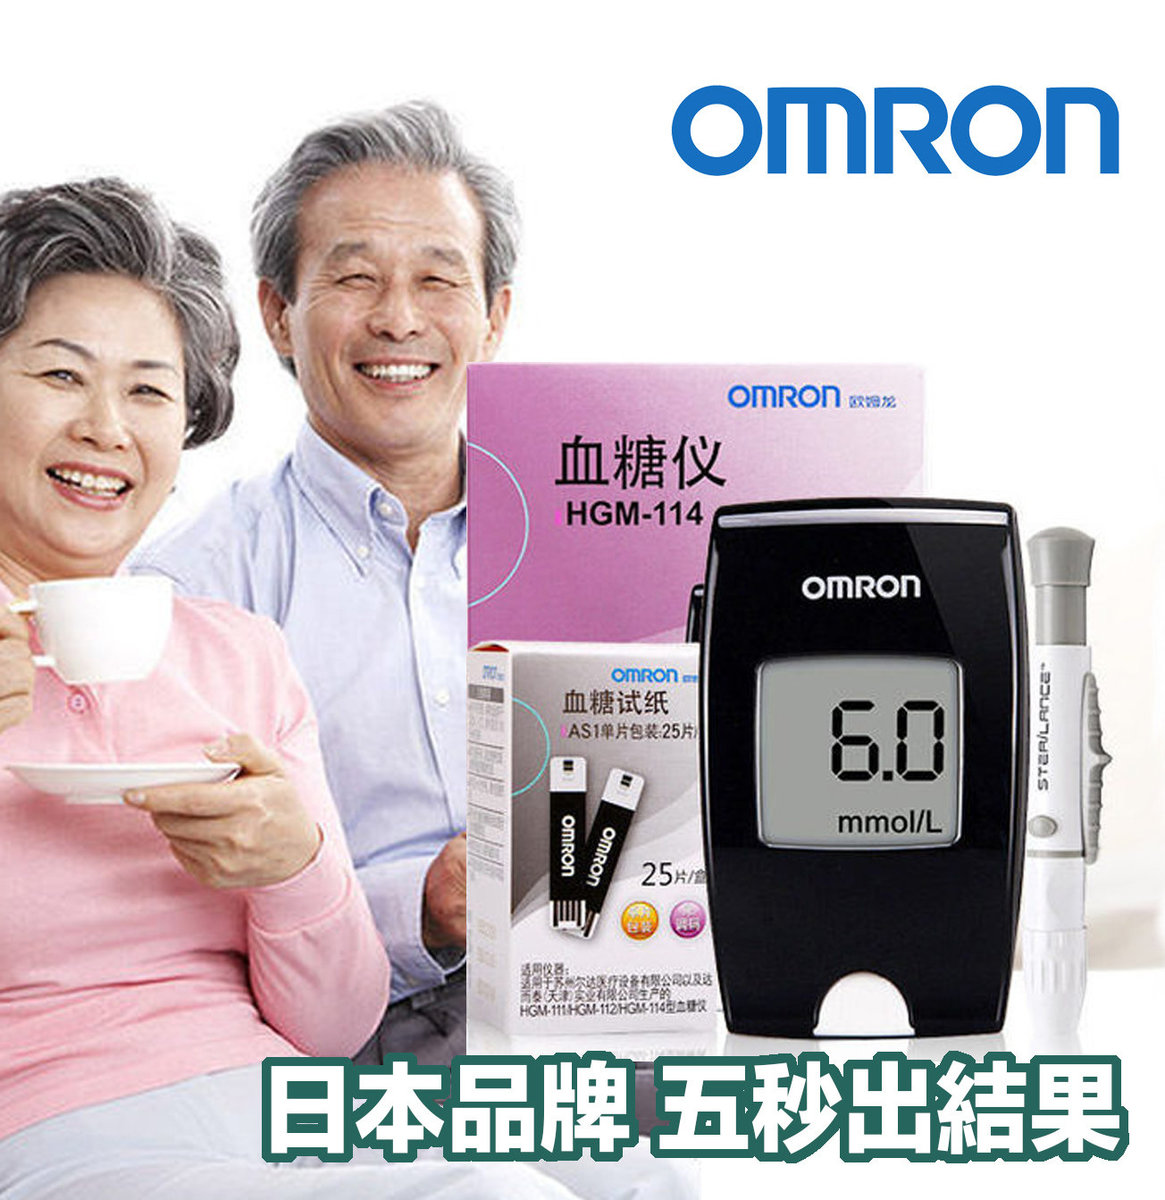 Omron HGM-114 血糖儀 + 送: AS1試紙 25片 + 25支針頭